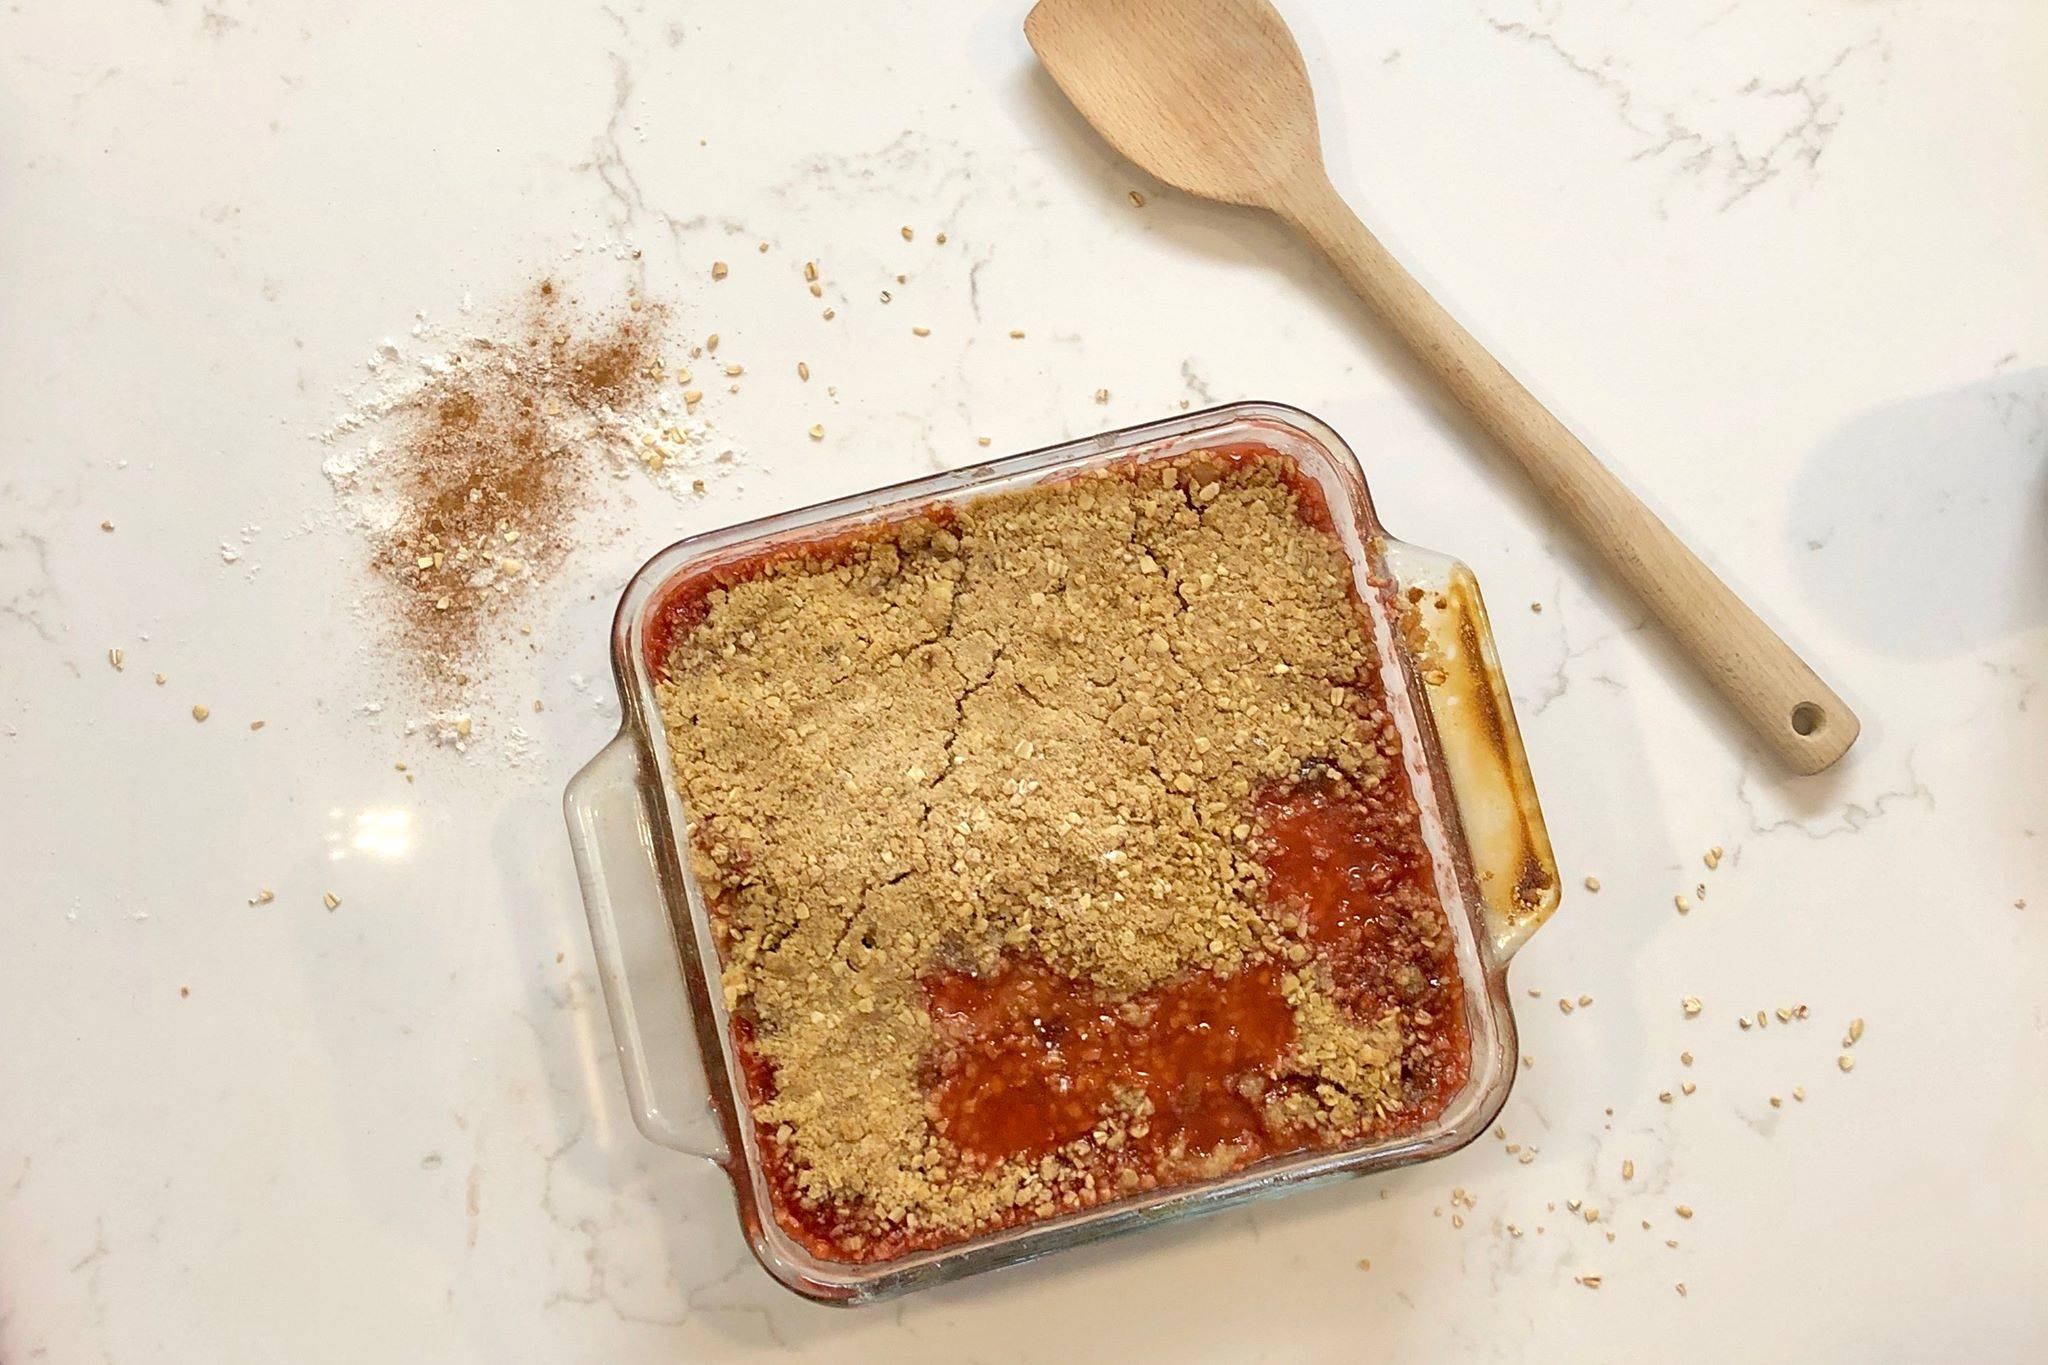 Rhubarb pairs well with sweet fruit like strawberries, and work well in desserts like strawberry rhubarb crumble, June 1, 2019, in Anchorage, Alaska. (Photo by Victoria Petersen/Peninsula Clarion)
Rhubarb pairs well with sweet fruit like strawberries, and work well in desserts like strawberry rhubarb crumble, June 1, 2019, in Anchorage, Alaska. (Photo by Victoria Petersen/Peninsula Clarion)